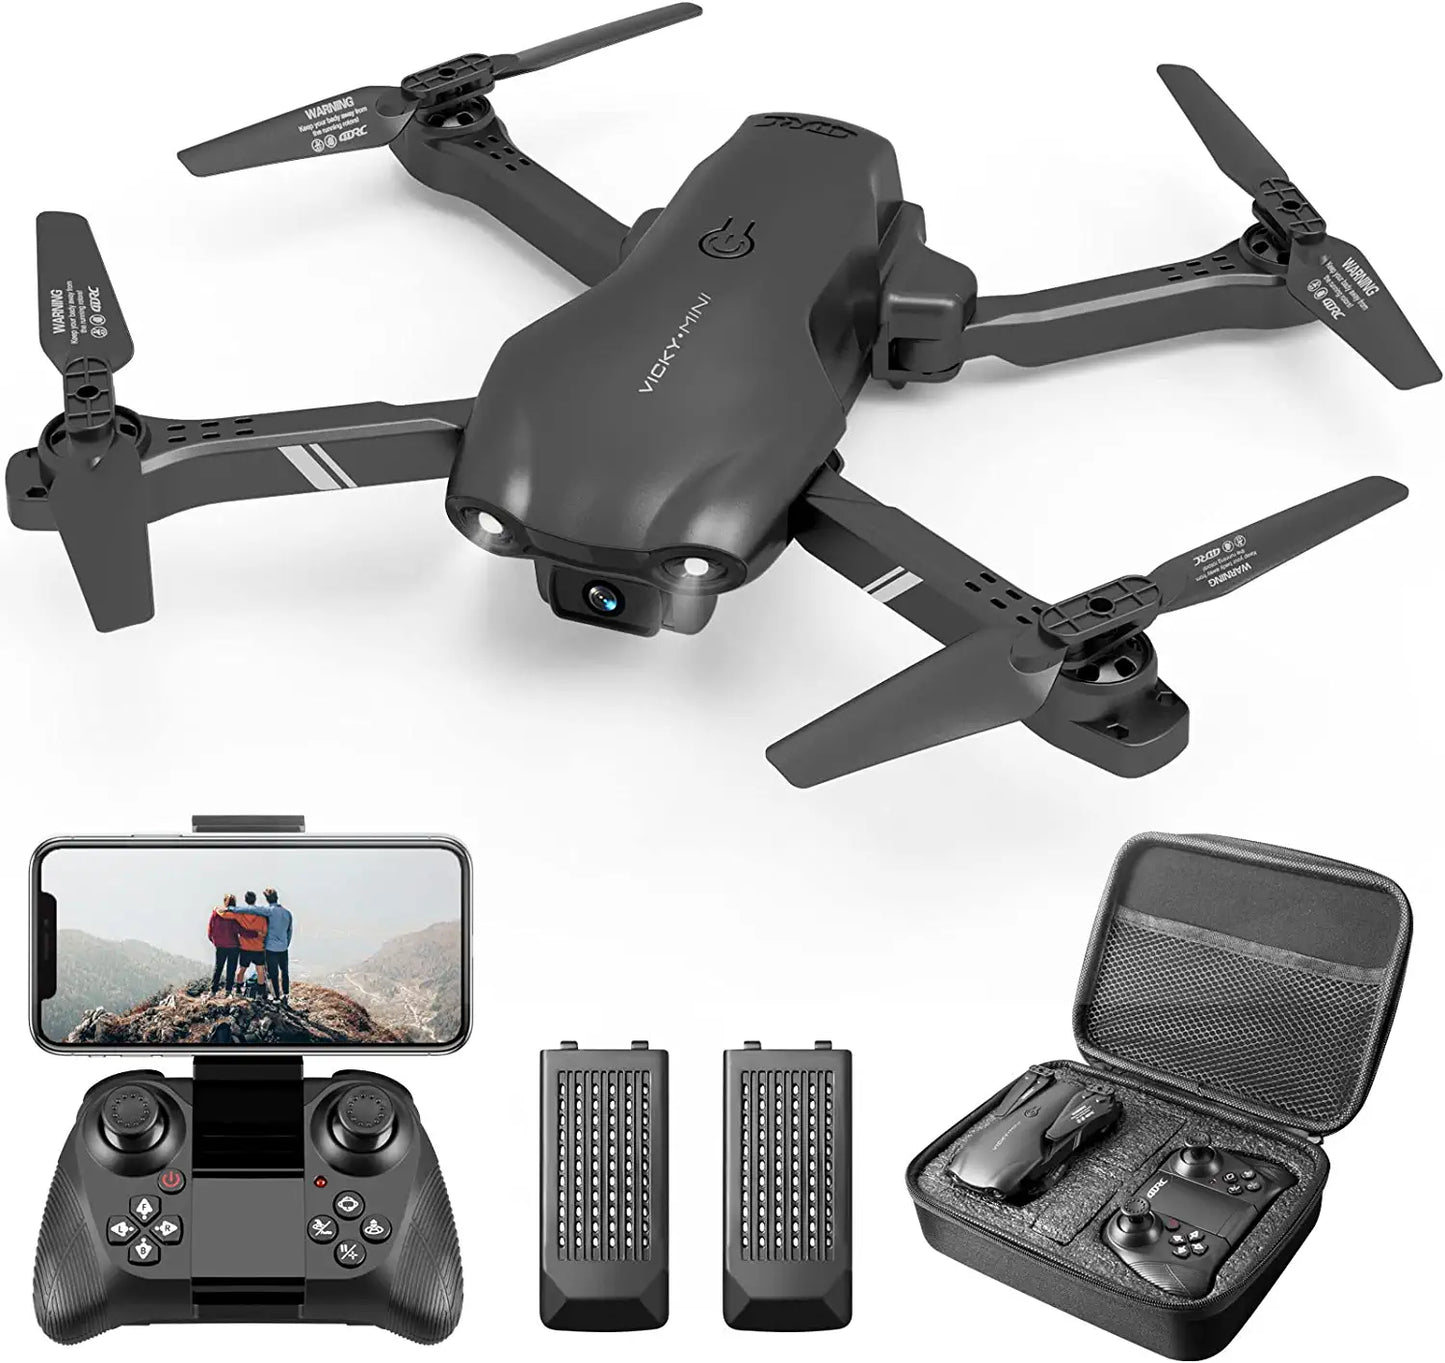 DRONEEYE 4DV13 Drone - for kids Adults with 1080P HD FPV Camera, Foldable Mini RC Quadcopter With Waypoint, Functions,Headless Mode,Altitude Hold,Gesture Selfie,3D Flips,Beginners Toys Gifts - RCDrone